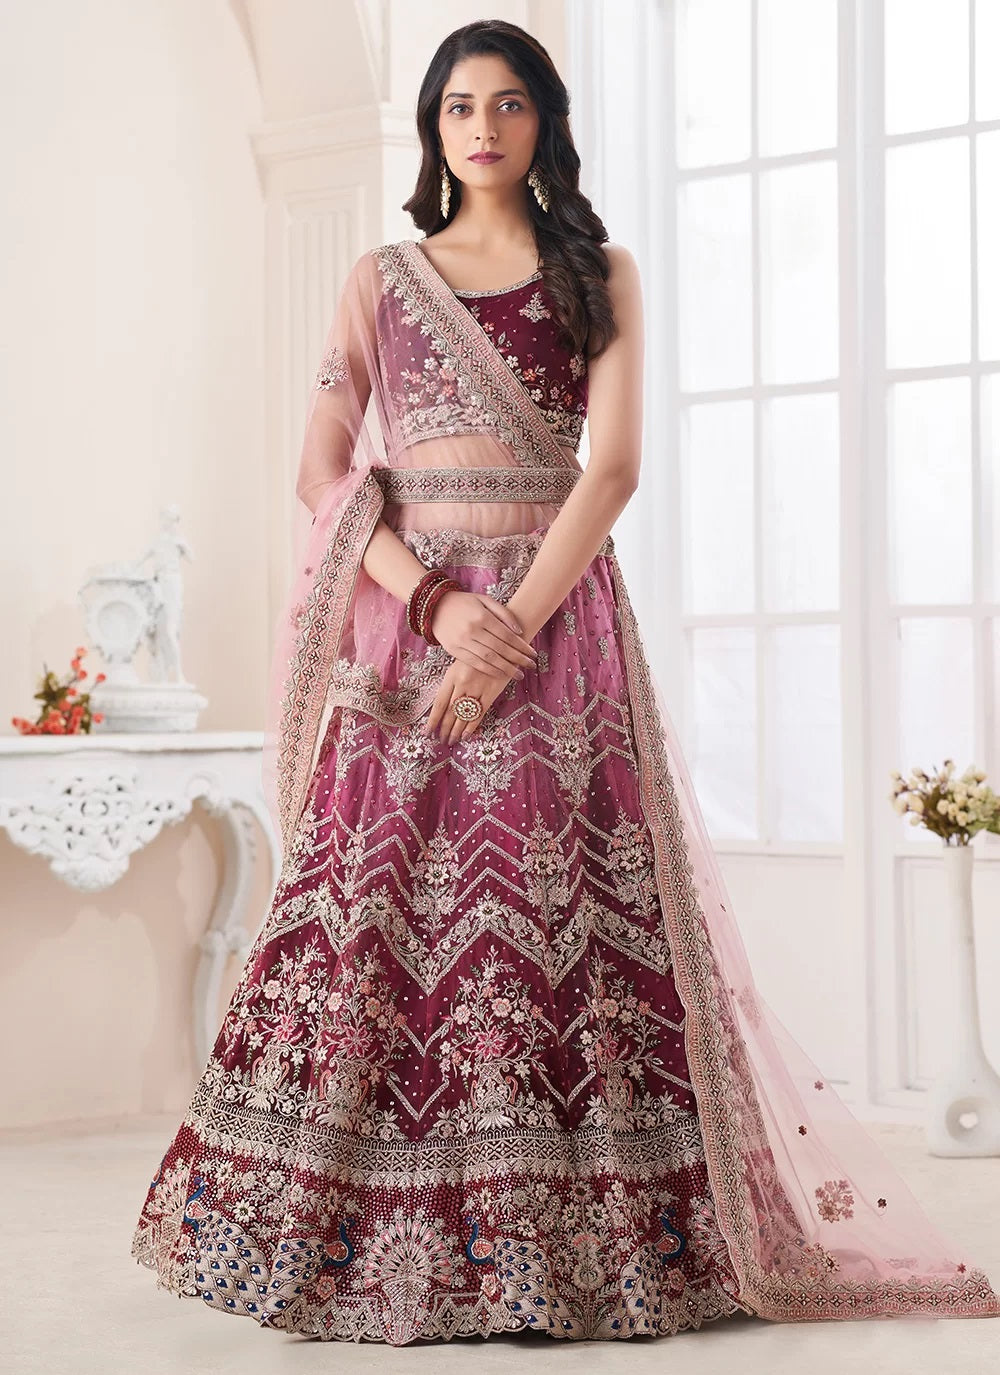 Exquisite Multi Colored Art Silk Lehenga with Stunning Stone and Sequin Embellishments